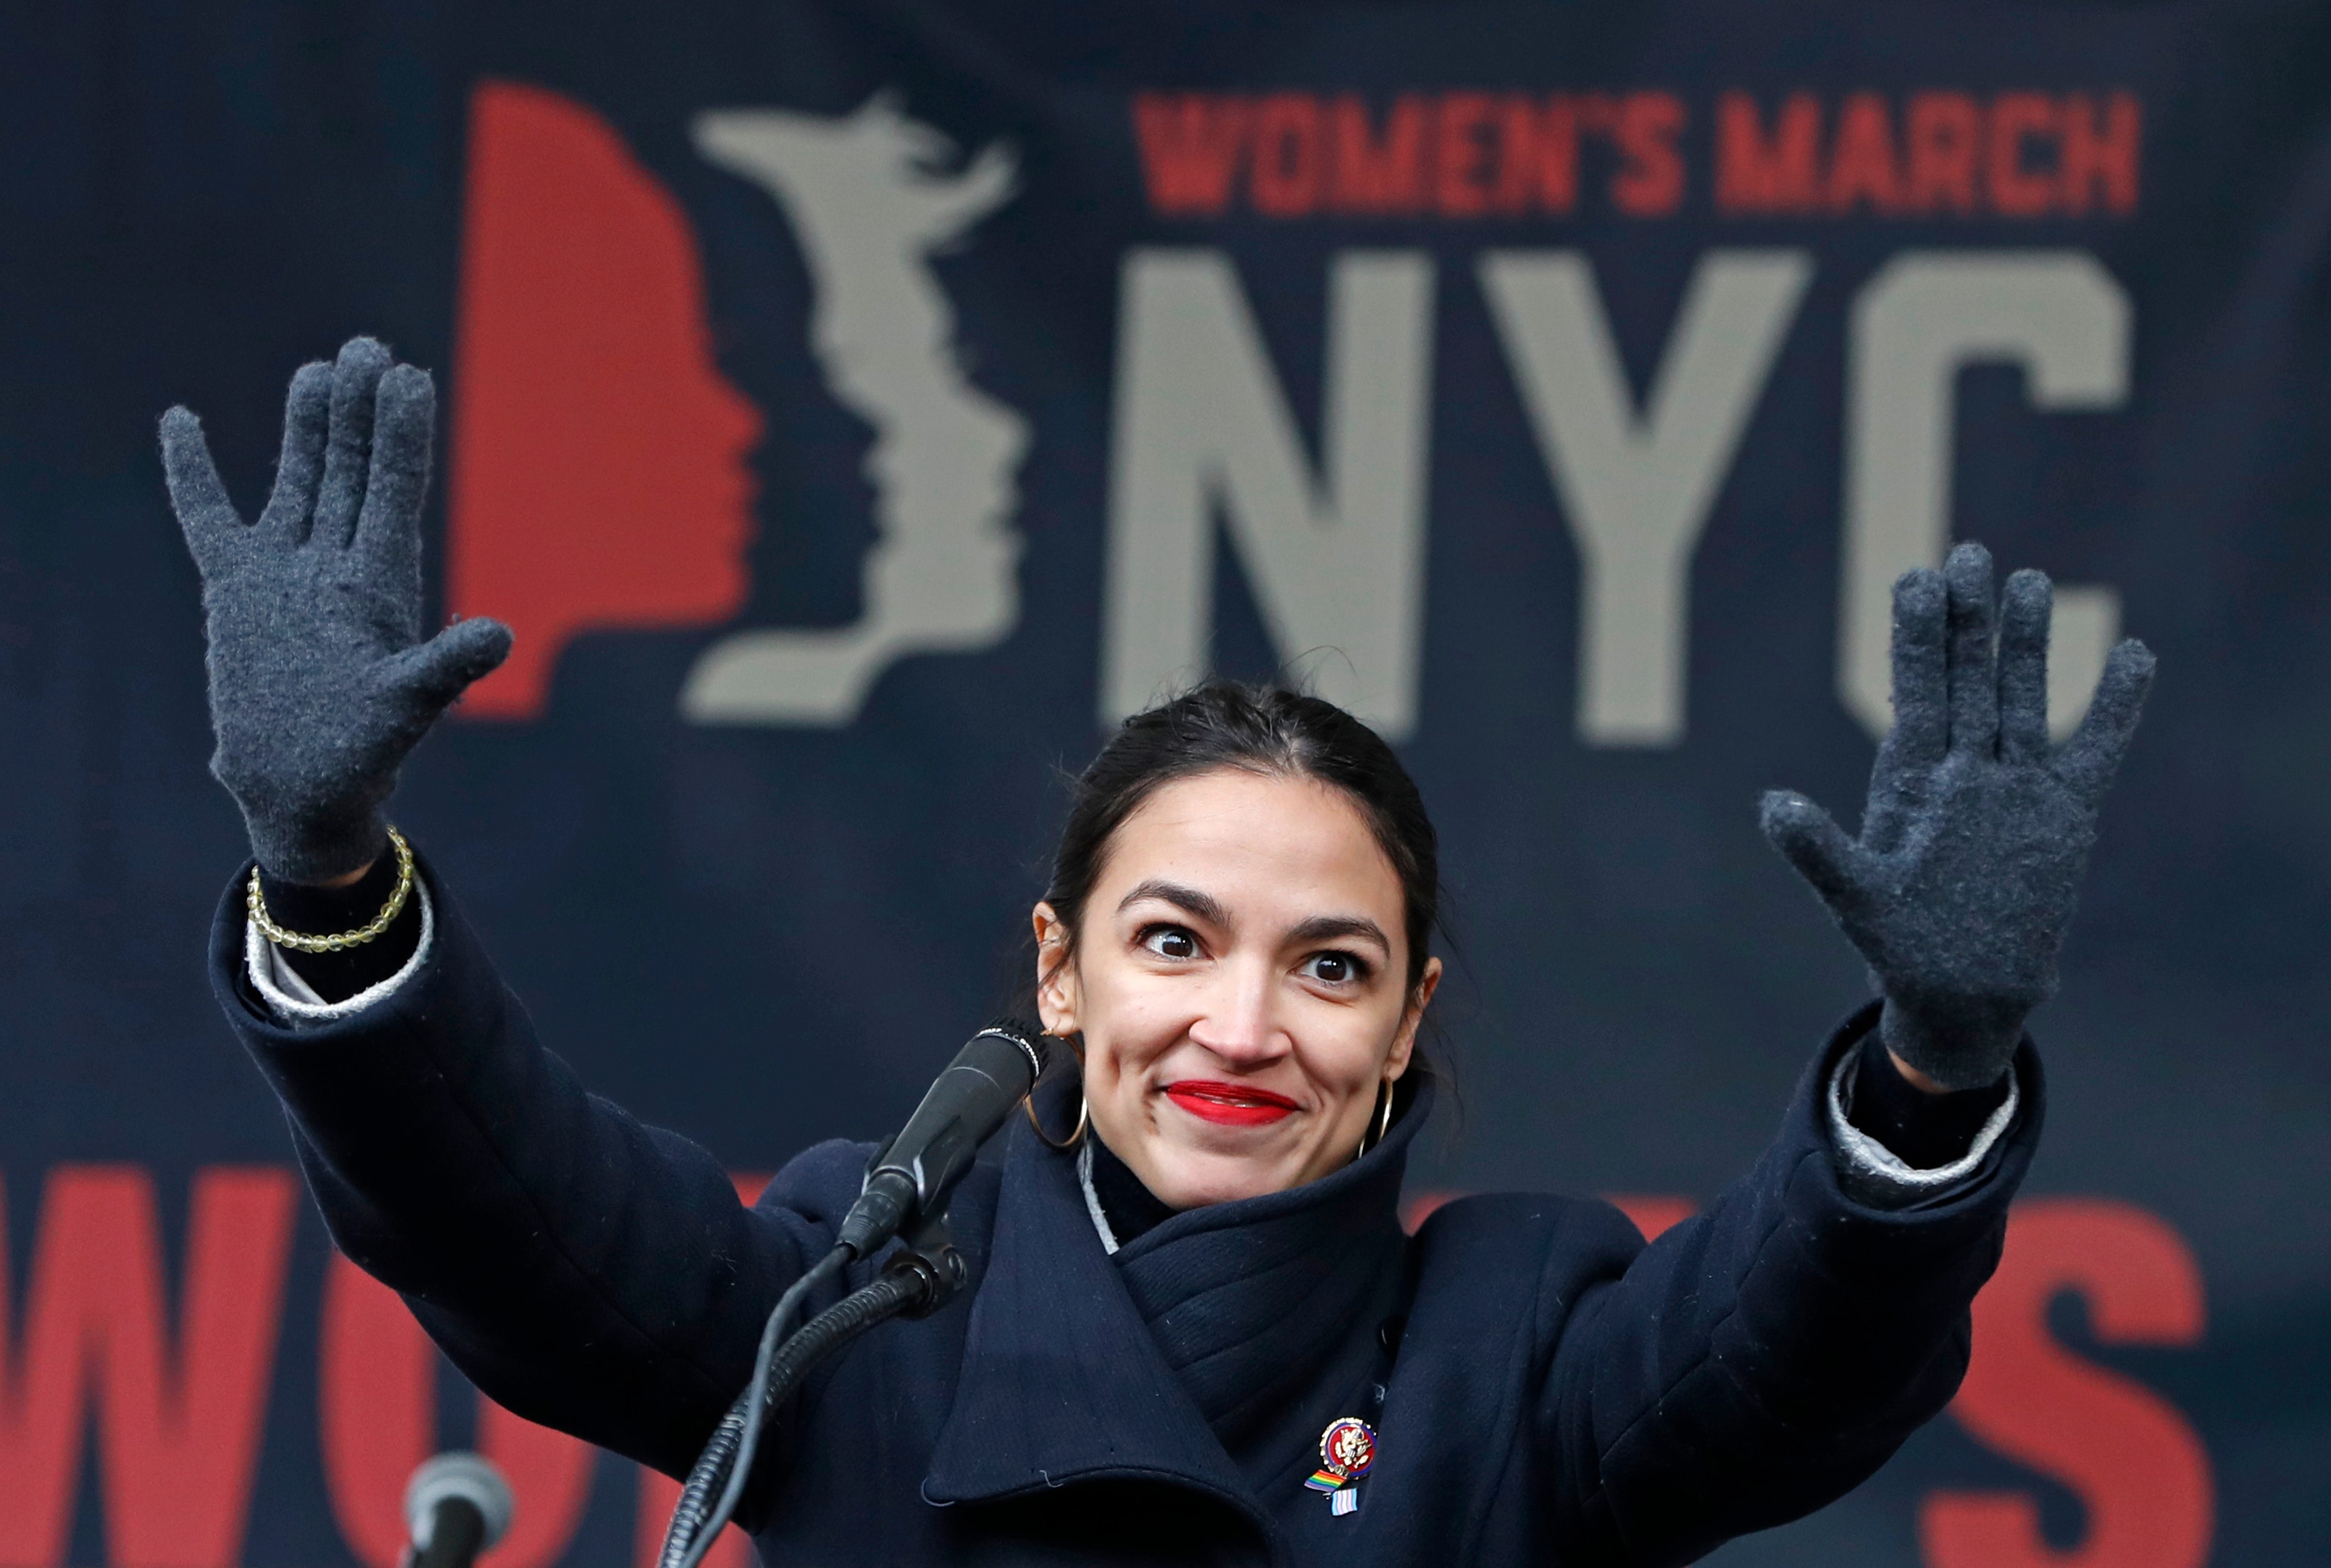 AOC says her policies are not 'free stuff': 'I never want to hear that term again'